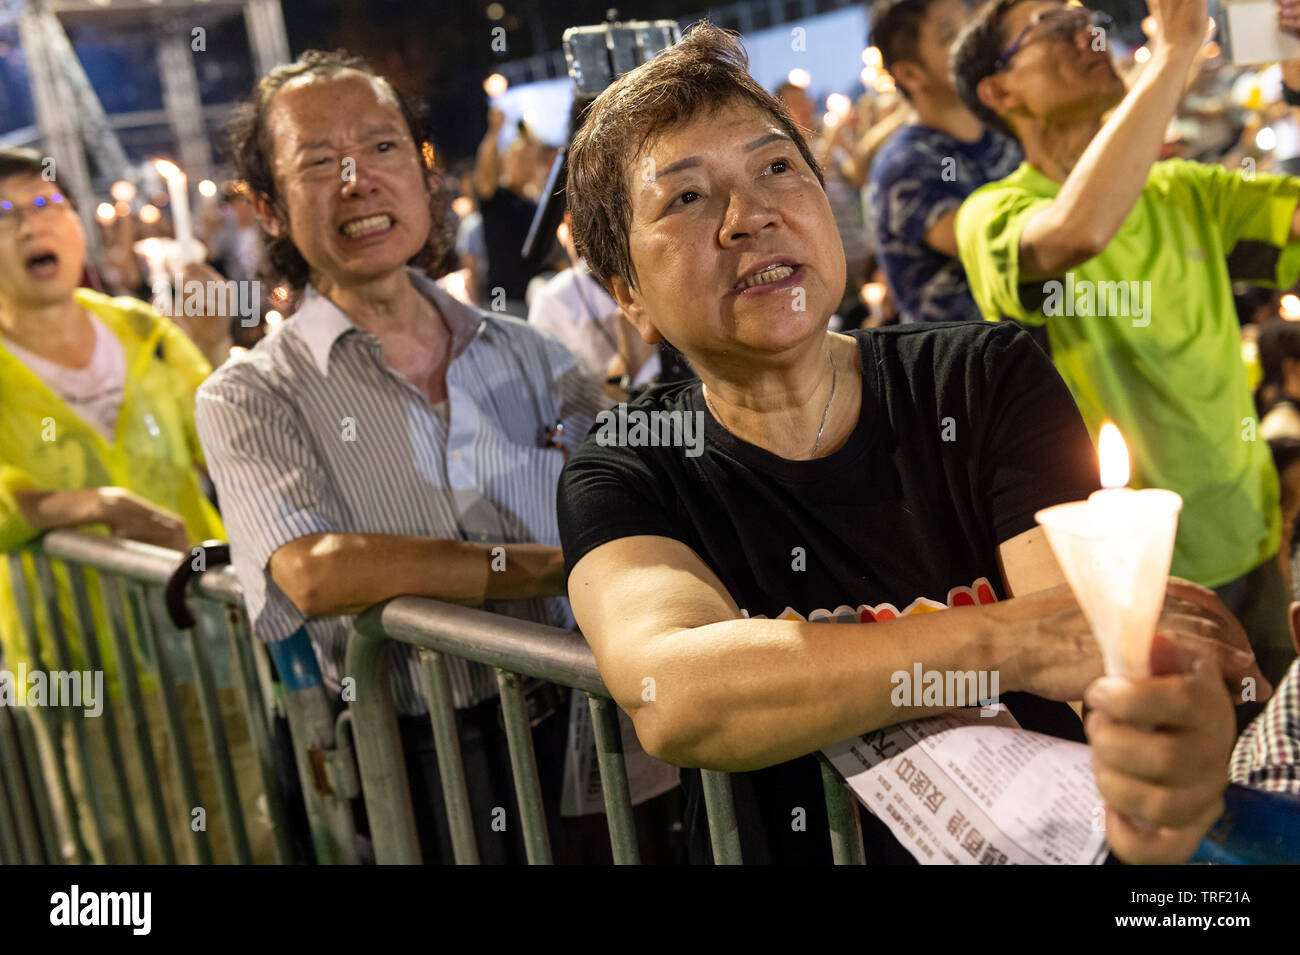 Hong Kong. 04th June, 2019. A candlelit vigil takes place in Hong Kong’s Victoria Park to mark the 30th Anniversary of the Tiananmen Square massacre in Beijing China in 1989. As the only location on Chinese soli that such a rally is allowed, the crowds are overflowing people fear the ever deteriorating human rights in China. Alamy Live News Credit: Jayne Russell/Alamy Live News Stock Photo